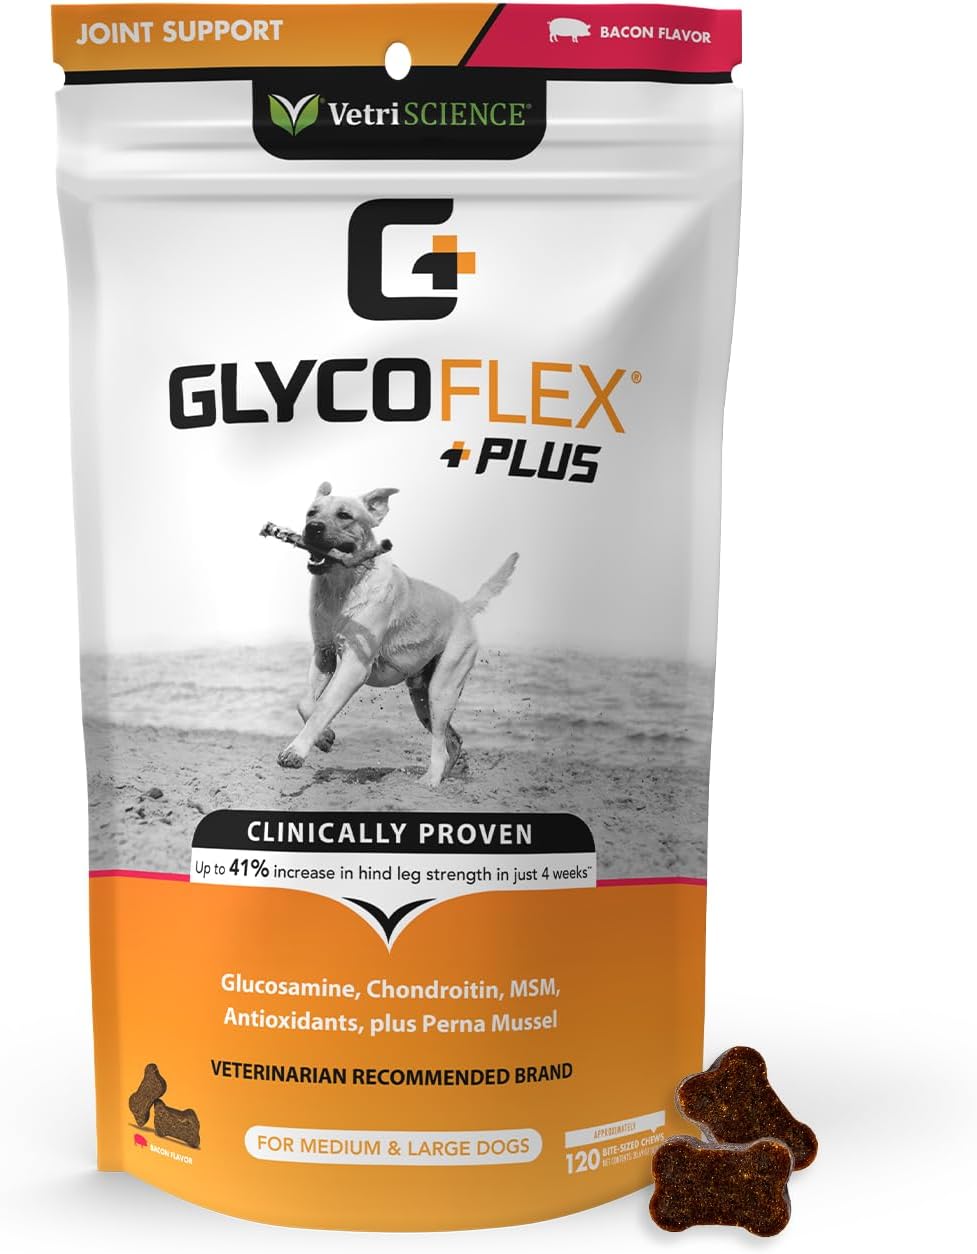 VetriScience Glycoflex Plus, Clinically Proven Hip and Joint Supplement for Dogs - Advanced Dog Supplement with Glucosamine, Chondroitin, MSM, Green Lipped Mussel & DMG - 120 Chews, Bacon Flavor?